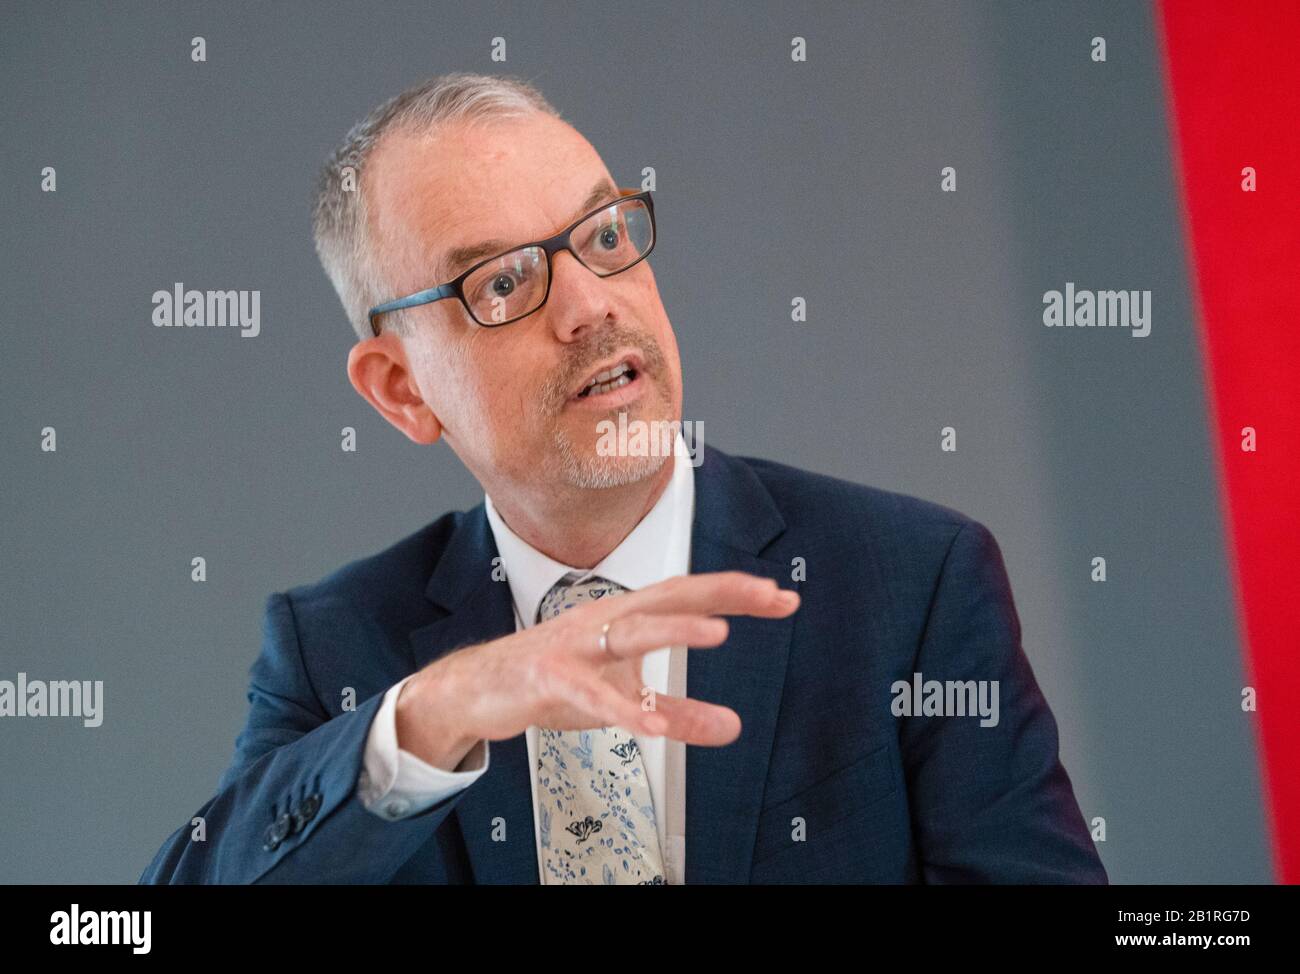 27 February 2020, Berlin: Christoph Martin Vogtherr, General Director of the Prussian Palaces and Gardens Foundation Berlin-Brandenburg, speaks at a press conference on the new location of the Käthe Kollwitz Museum. The museum will move into the representative theatre building of Charlottenburg Palace in 2022. Photo: Christophe Gateau/dpa Stock Photo